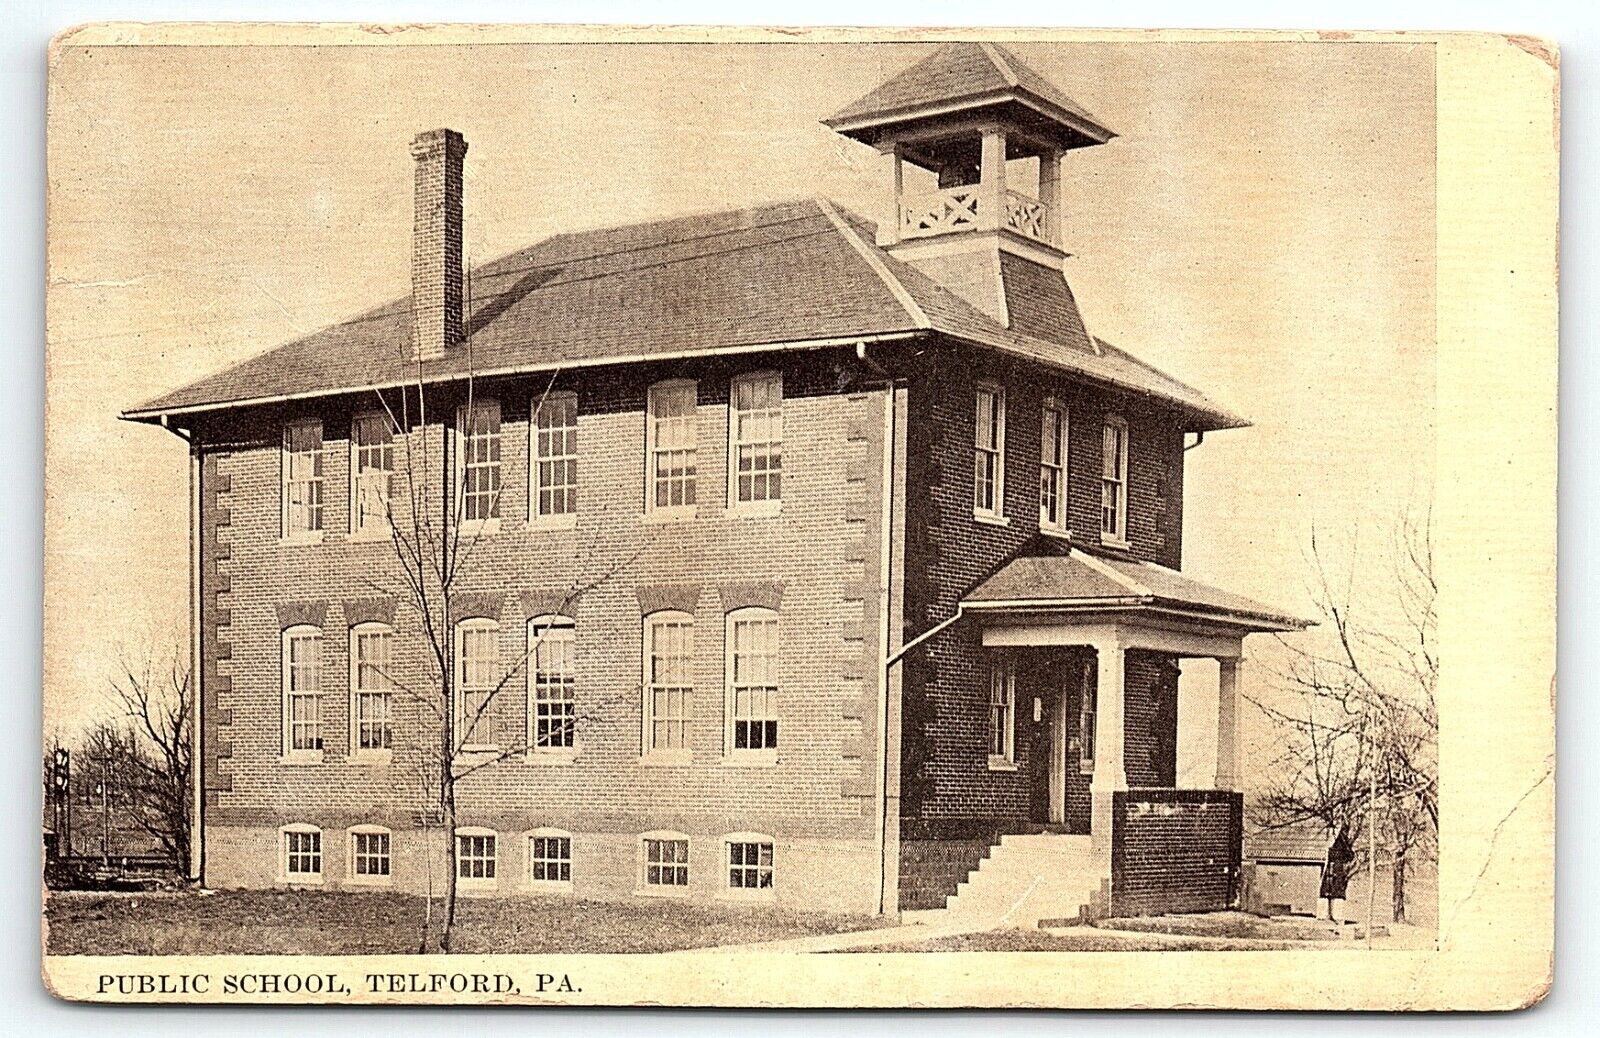 c1910 TELFORD PA PUBLIC SCHOOL STREET VIEW EARLY UNPOSTED POSTCARD P4092